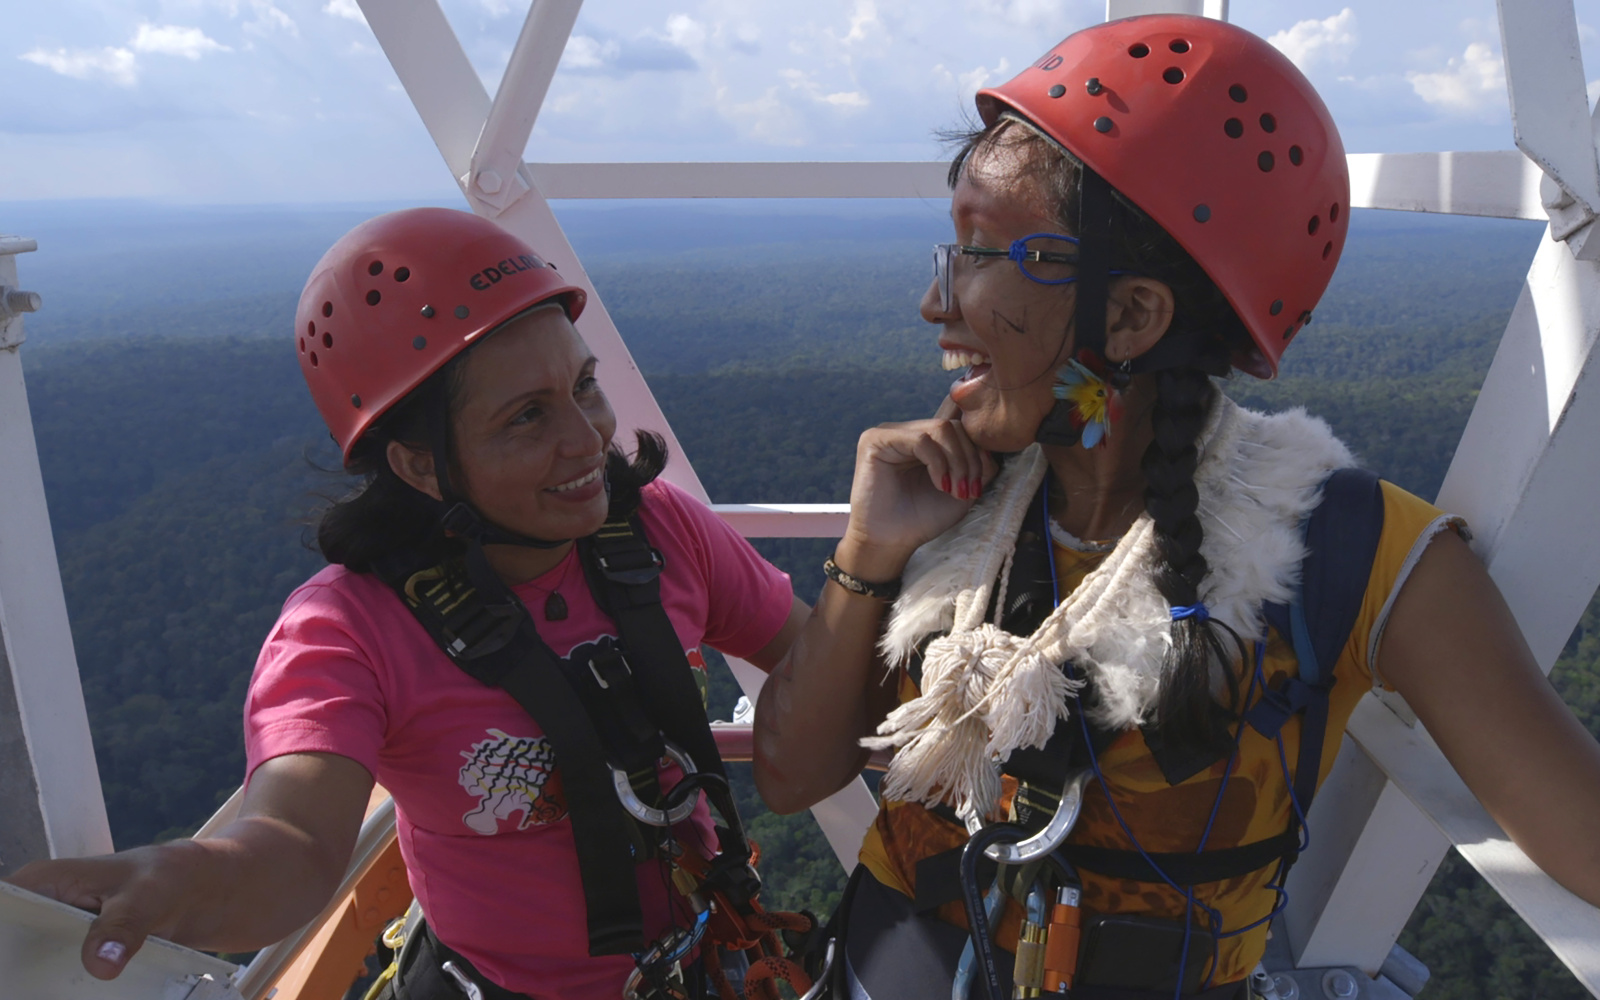 Two women can be seen standing high up on a tower. They wear safety helmets and laugh. In the background you can see forest up to the horizon.